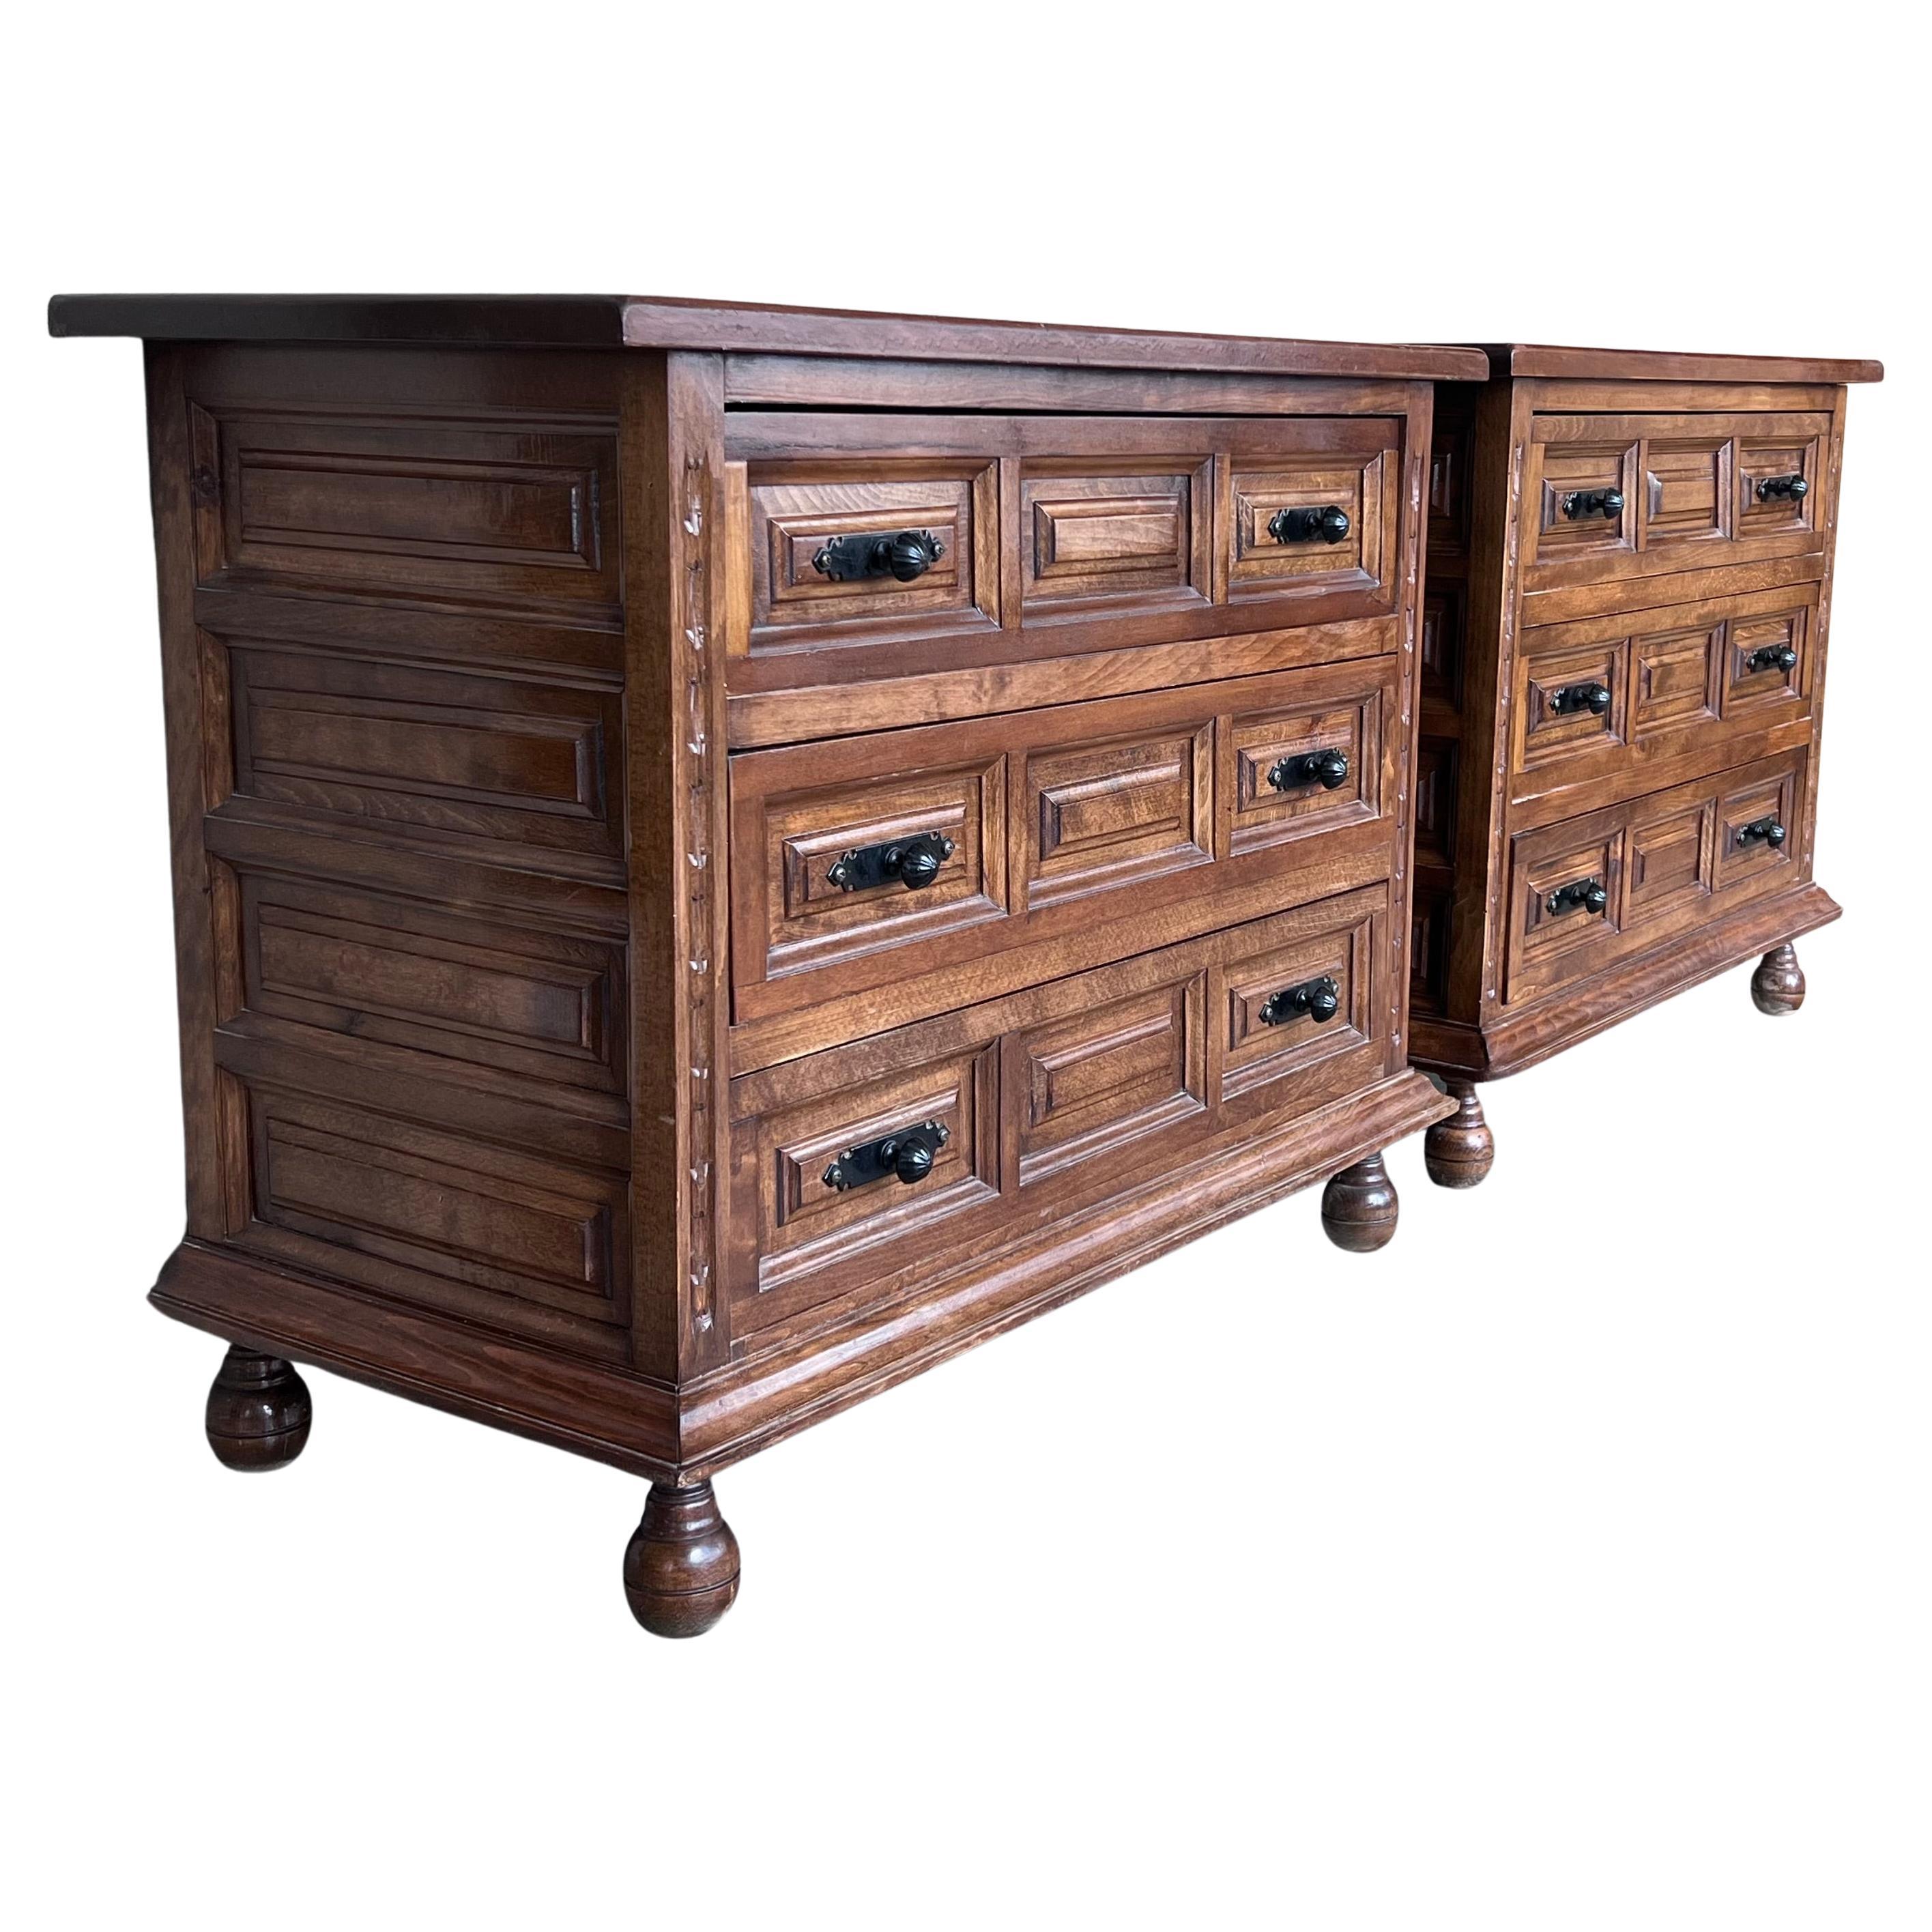 19th Catalan Spanish Baroque Carved Walnut Tuscan Two Drawers Chest of Drawers